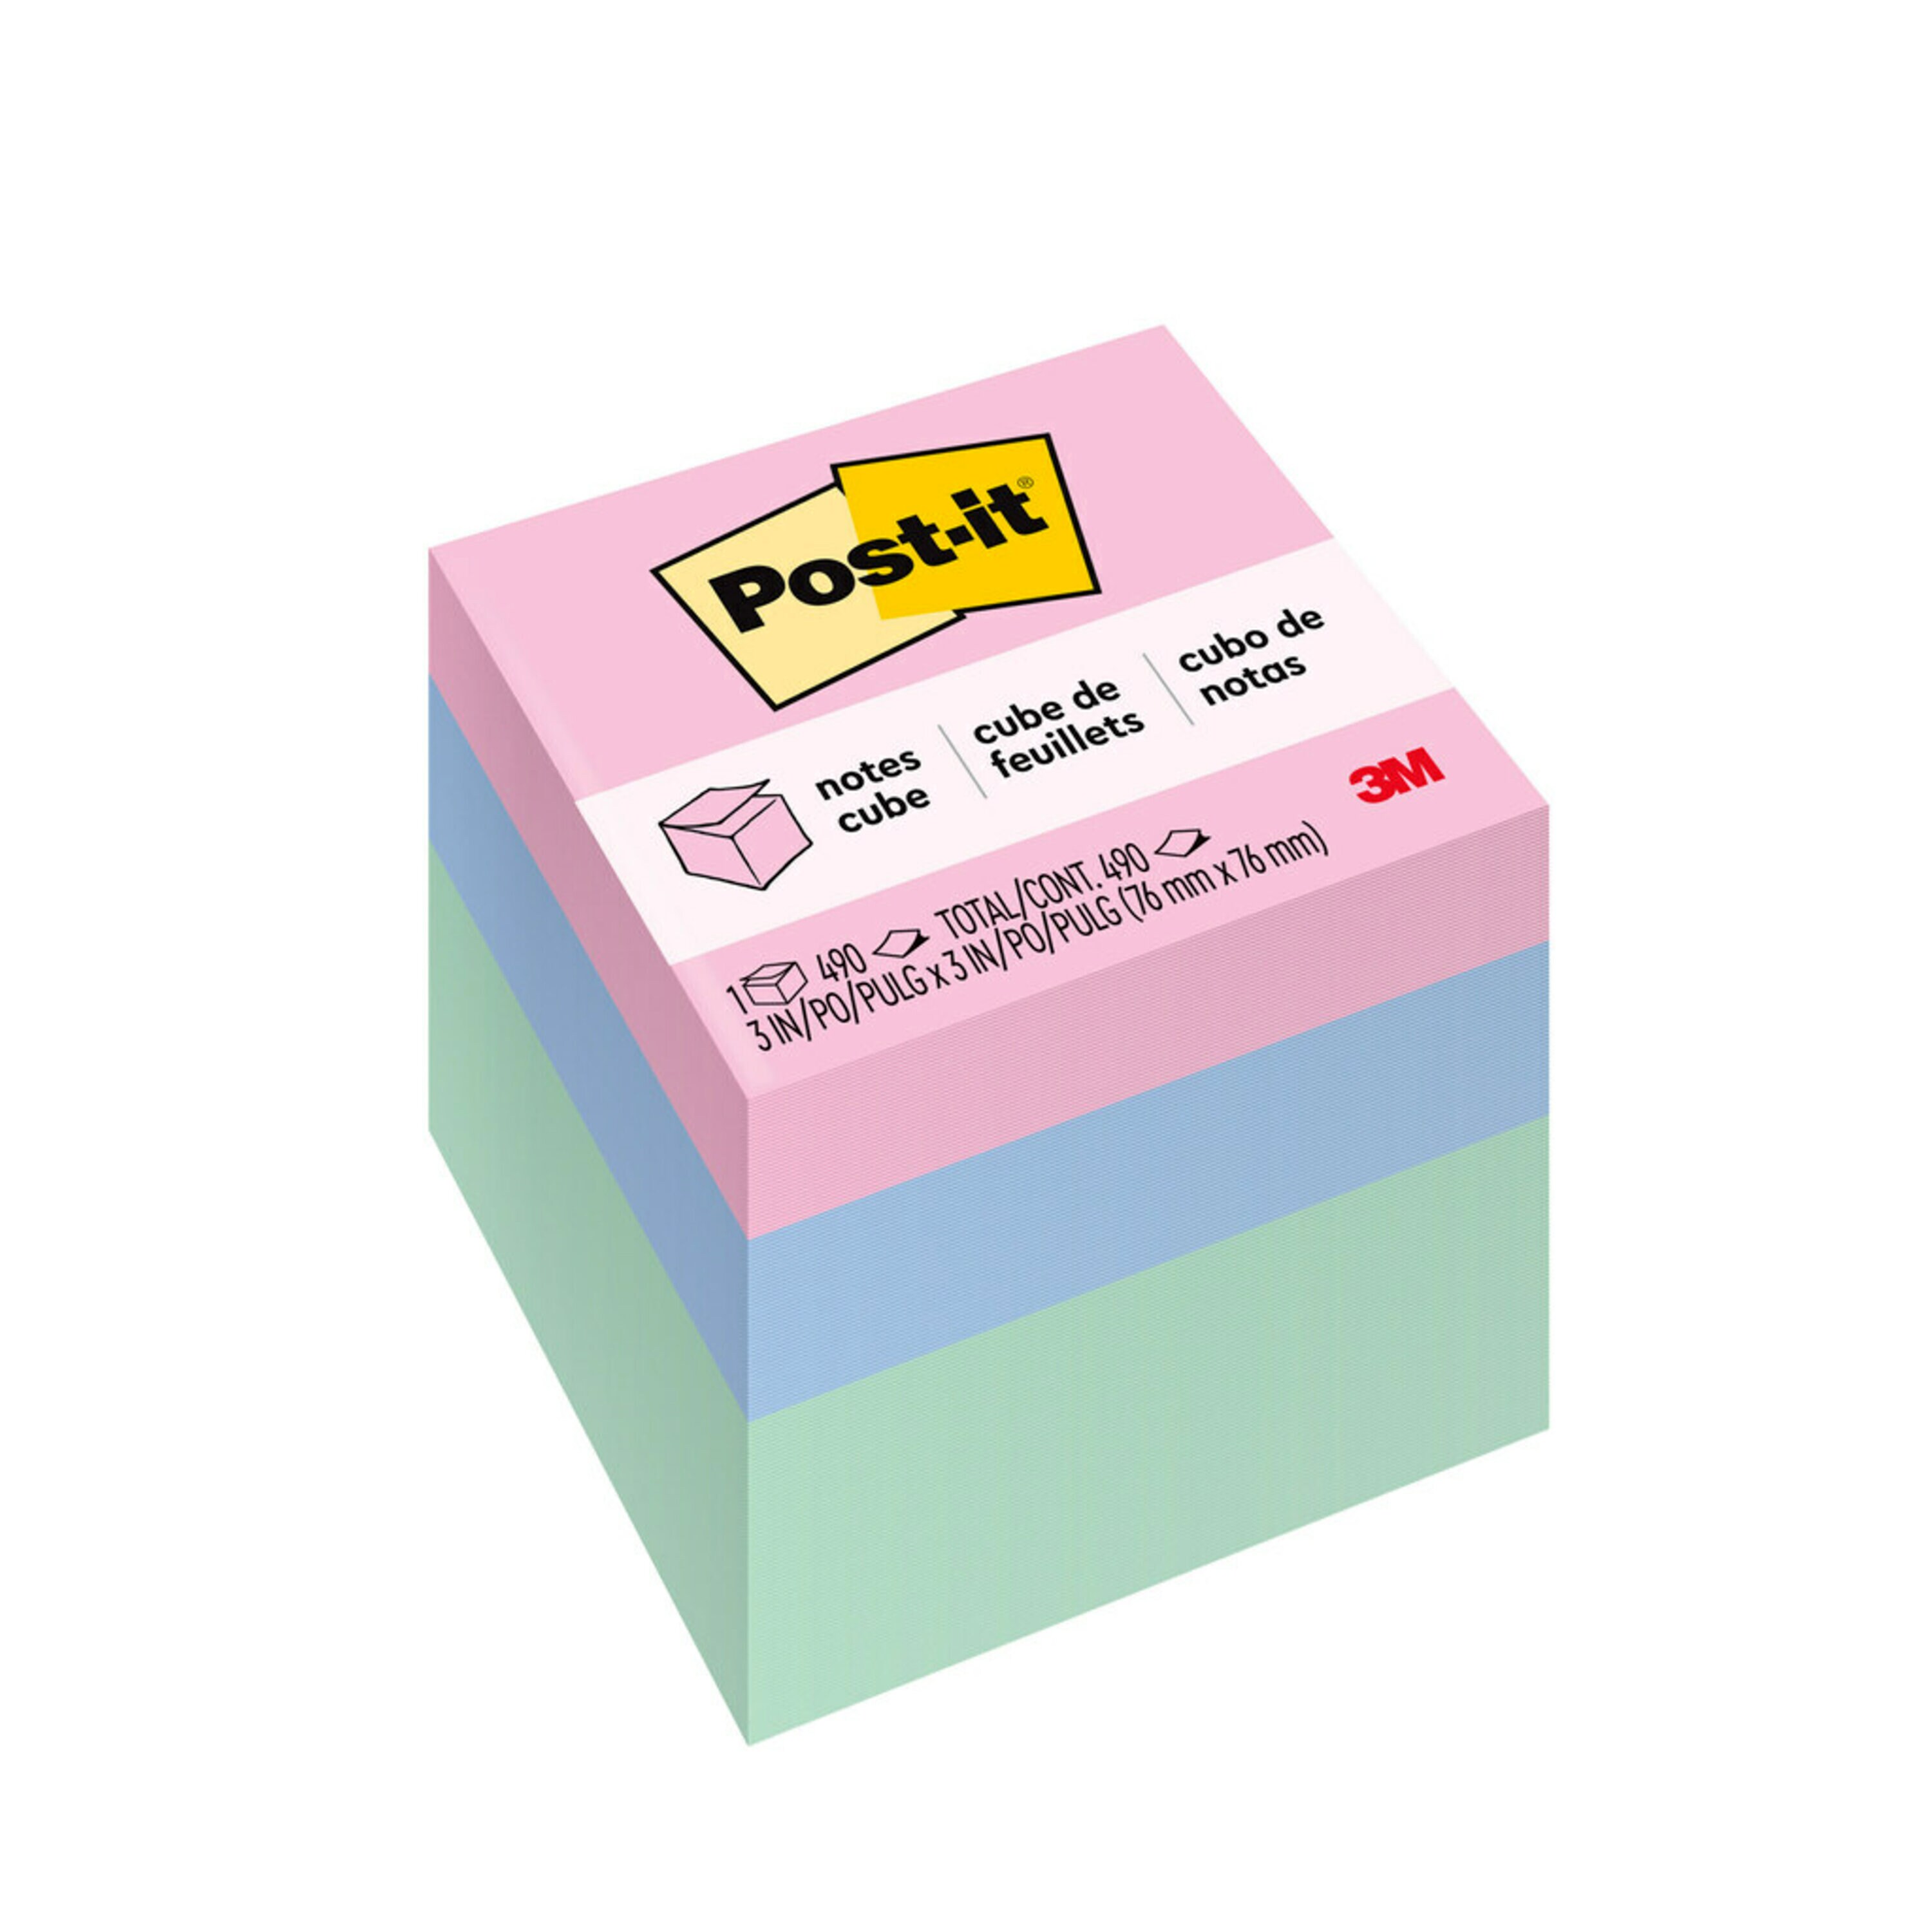 Post-it® Notes Cube, 3 in x 3 in, 490 sheets - image 1 of 9